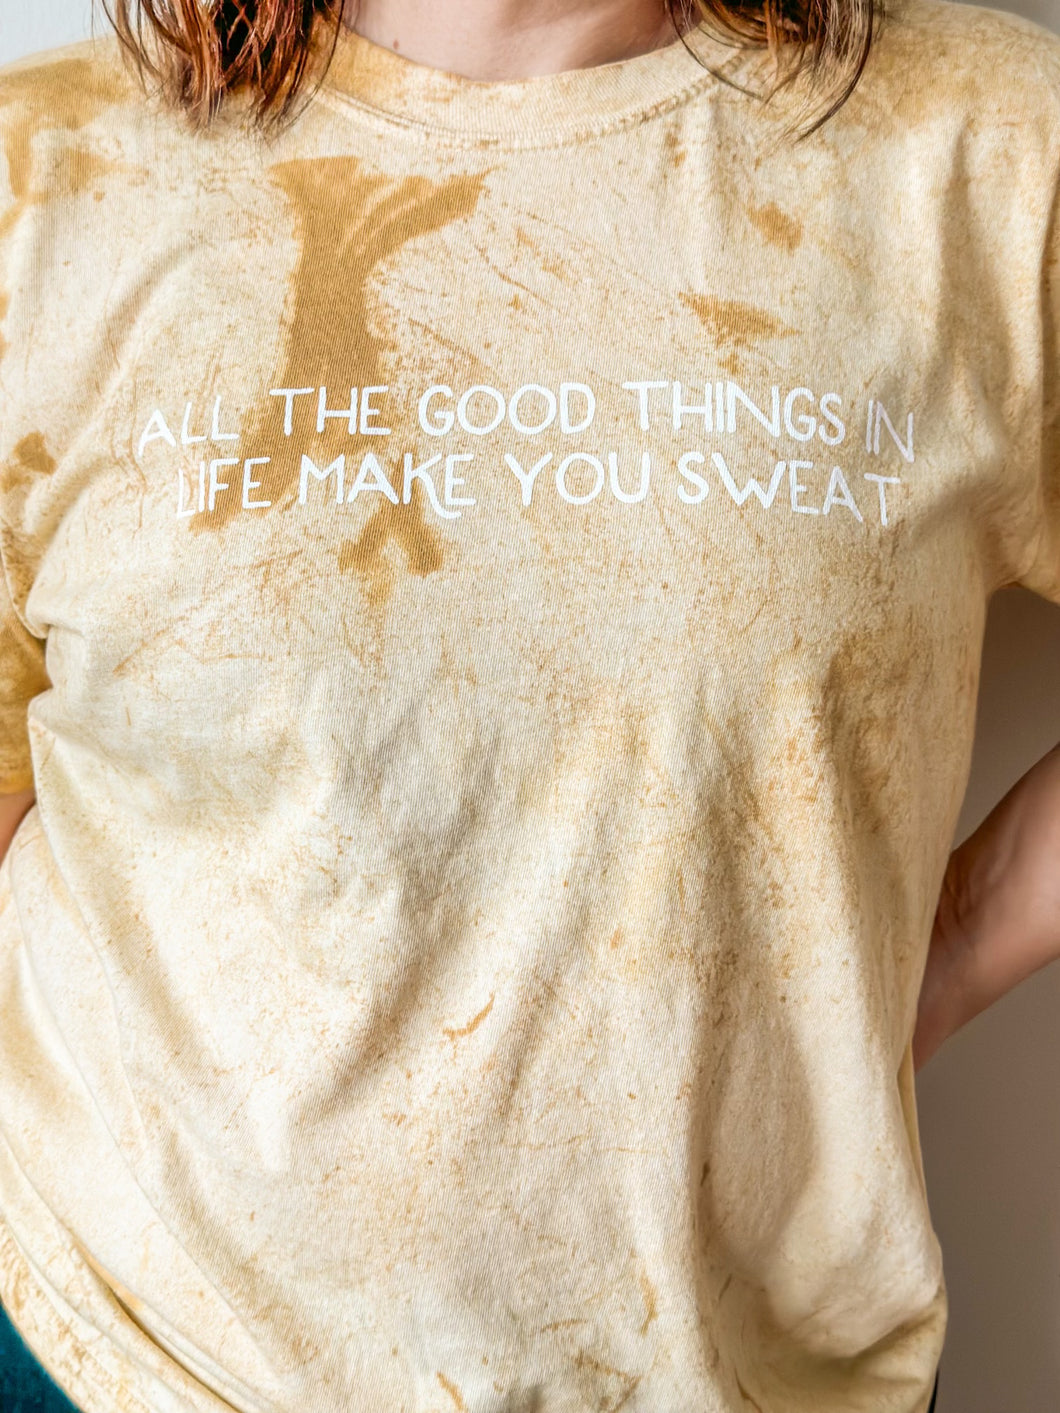 ALL THE GOOD THINGS IN LIFE MAKE YOU SWEAT